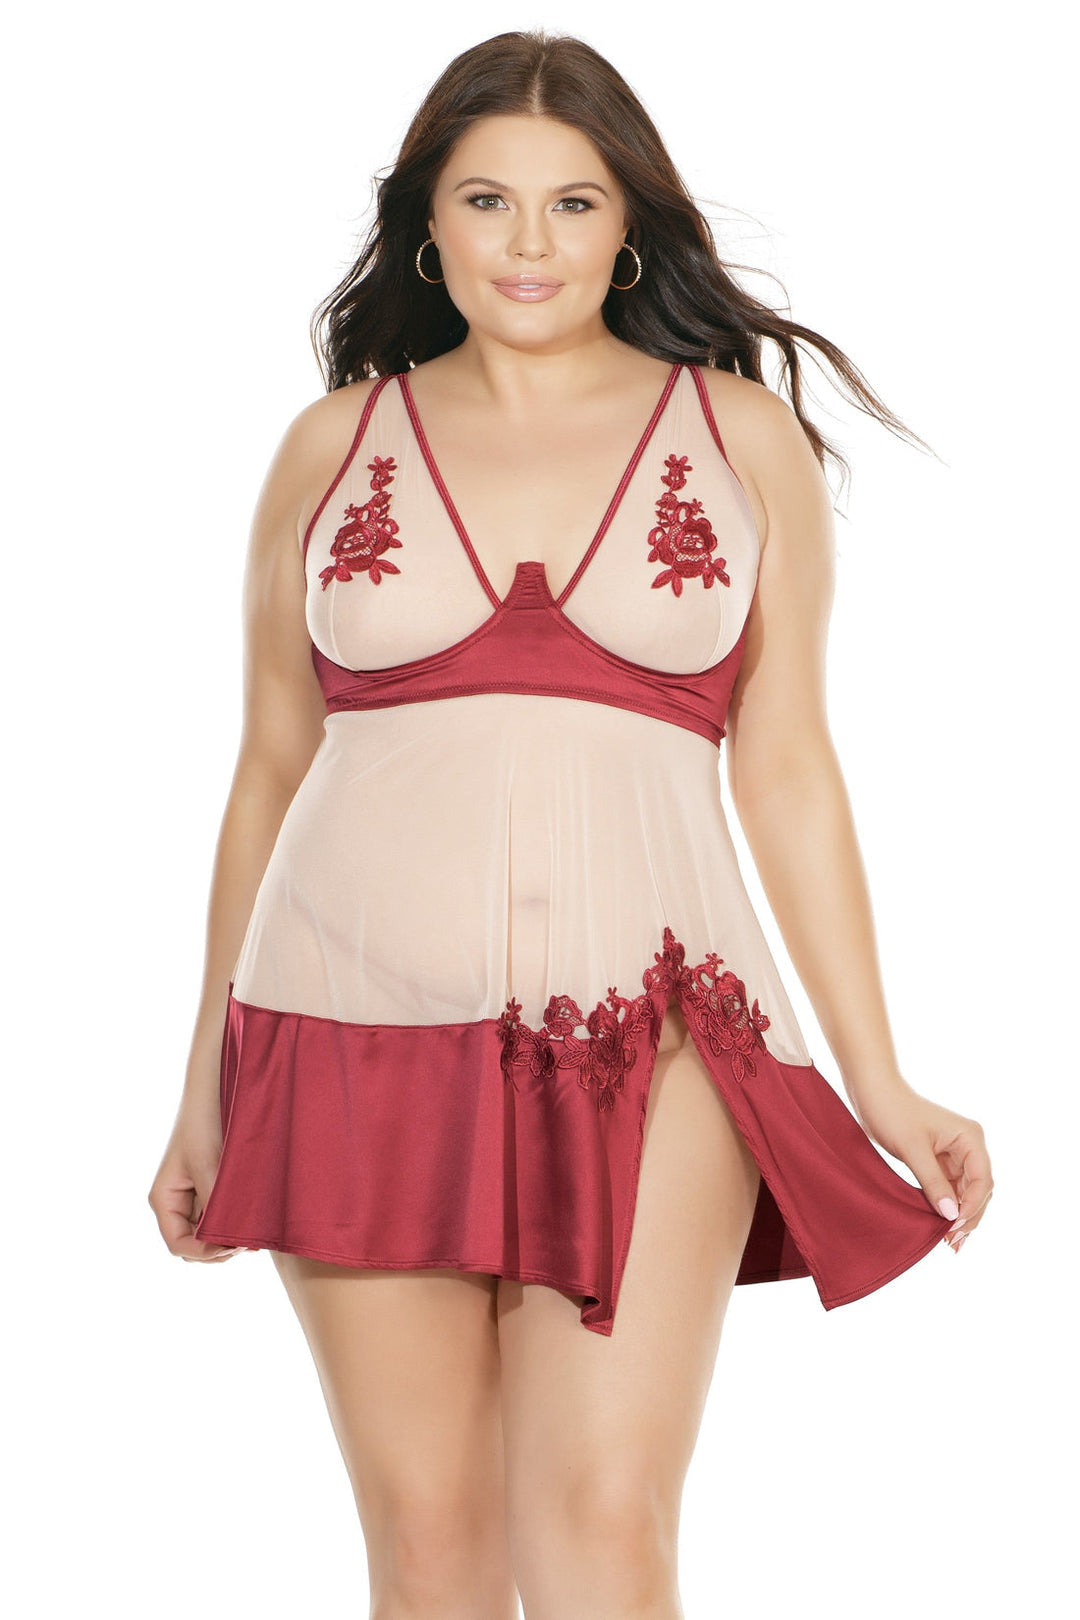 Diva Gorgeous Satin Underwire Babydoll and G-String Set Merlot Red